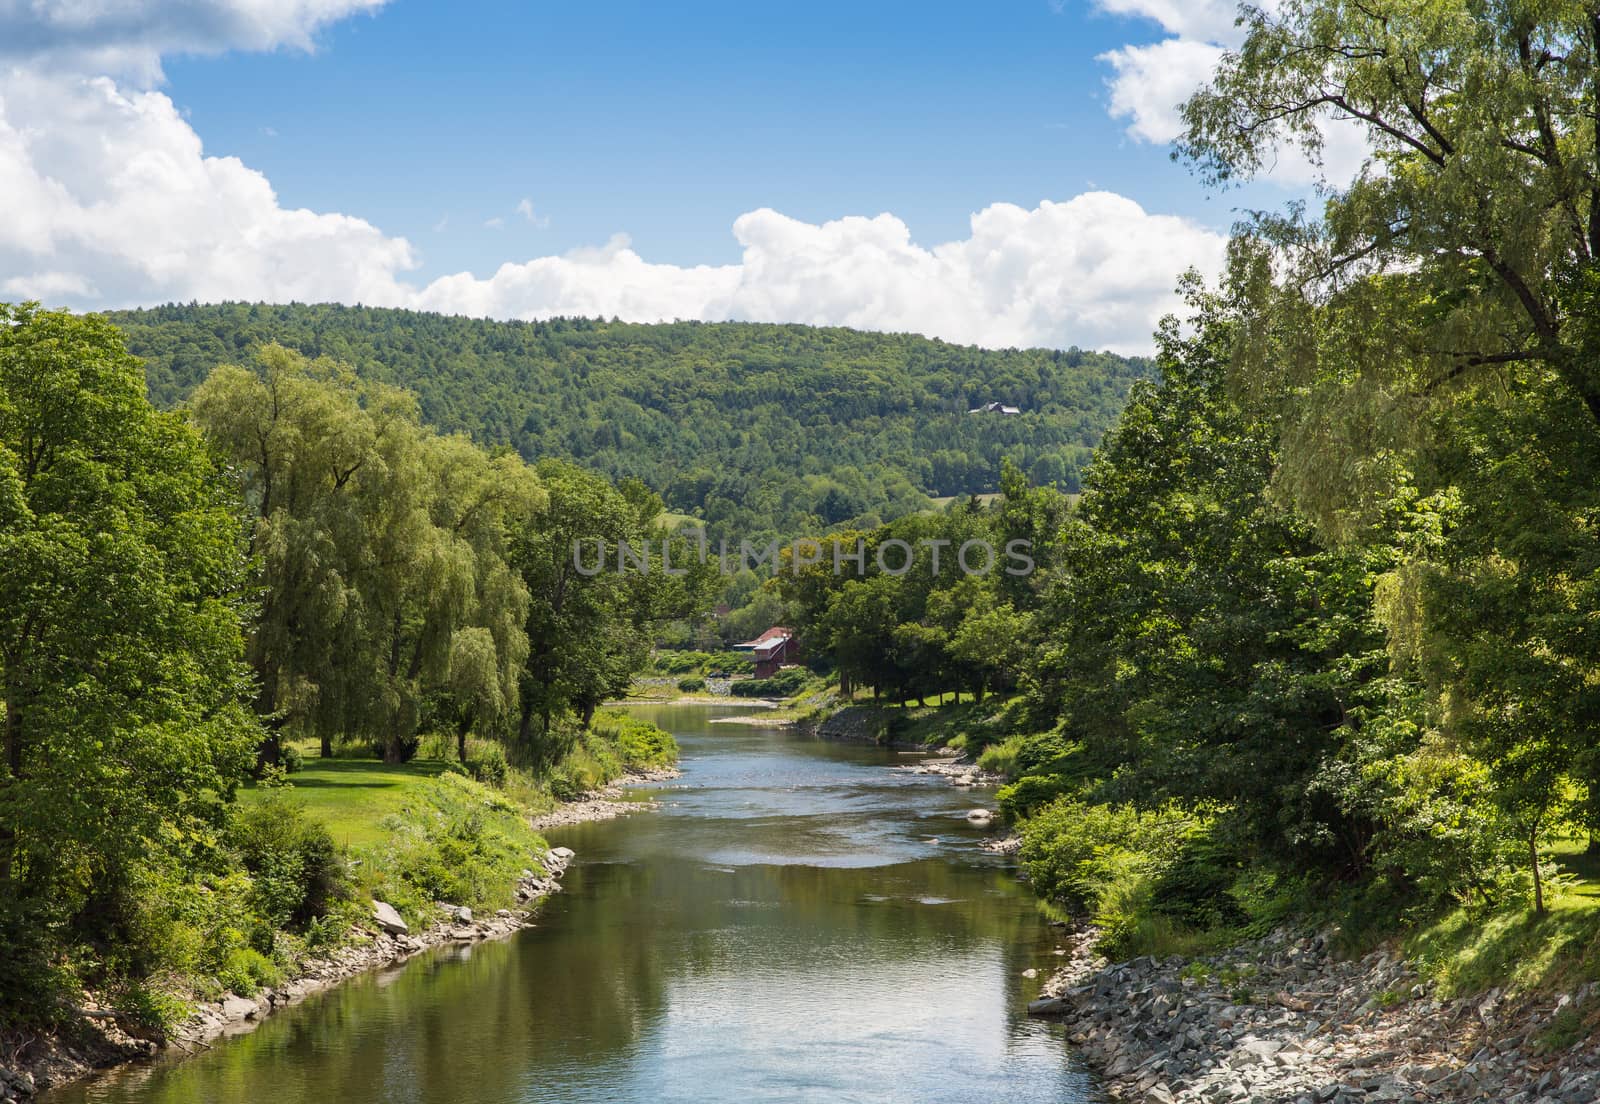 This image was taken in the small town of  Woodstock showing a tranquil river wandering through the Vermont greenery.